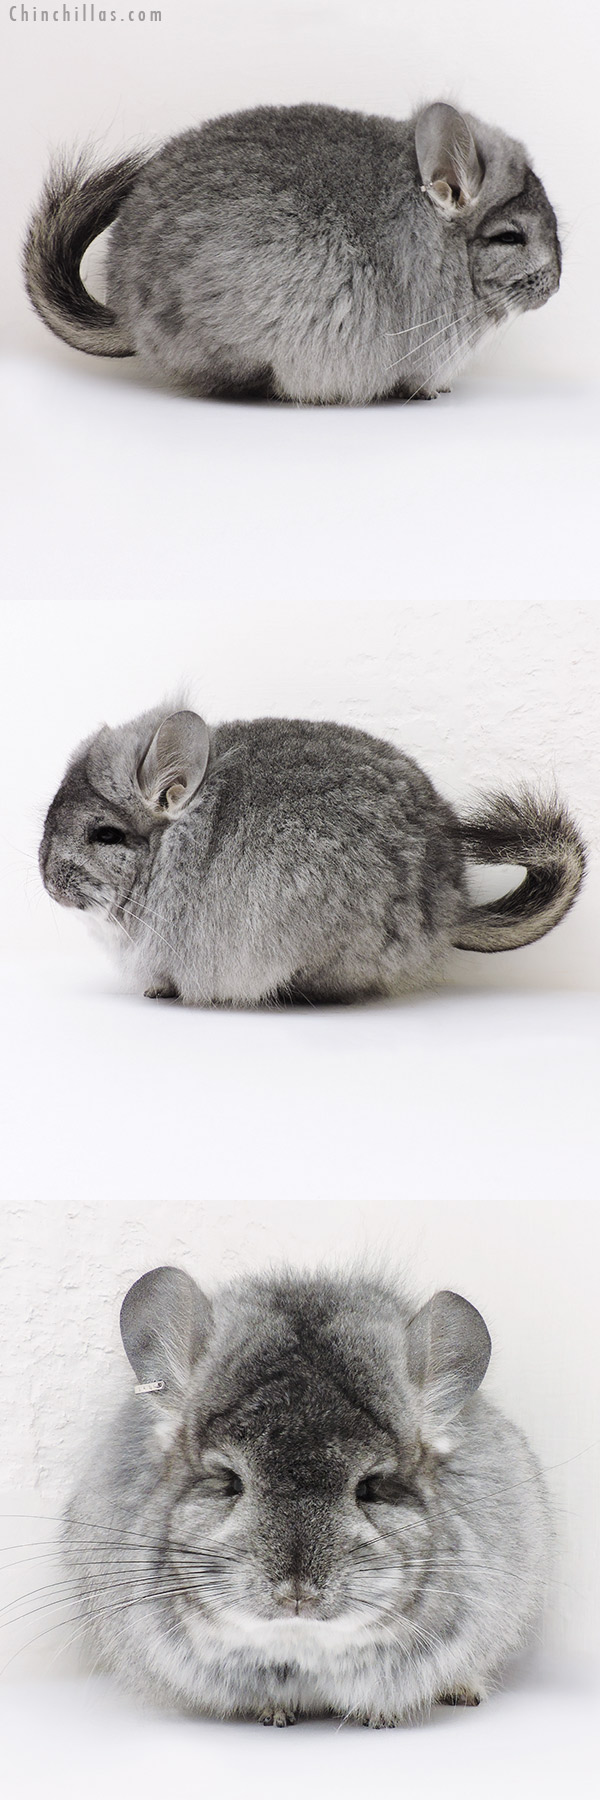 Chinchilla or related item offered for sale or export on Chinchillas.com - 16278 Exceptional Standard  Royal Persian Angora Female Chinchilla with Lion Mane